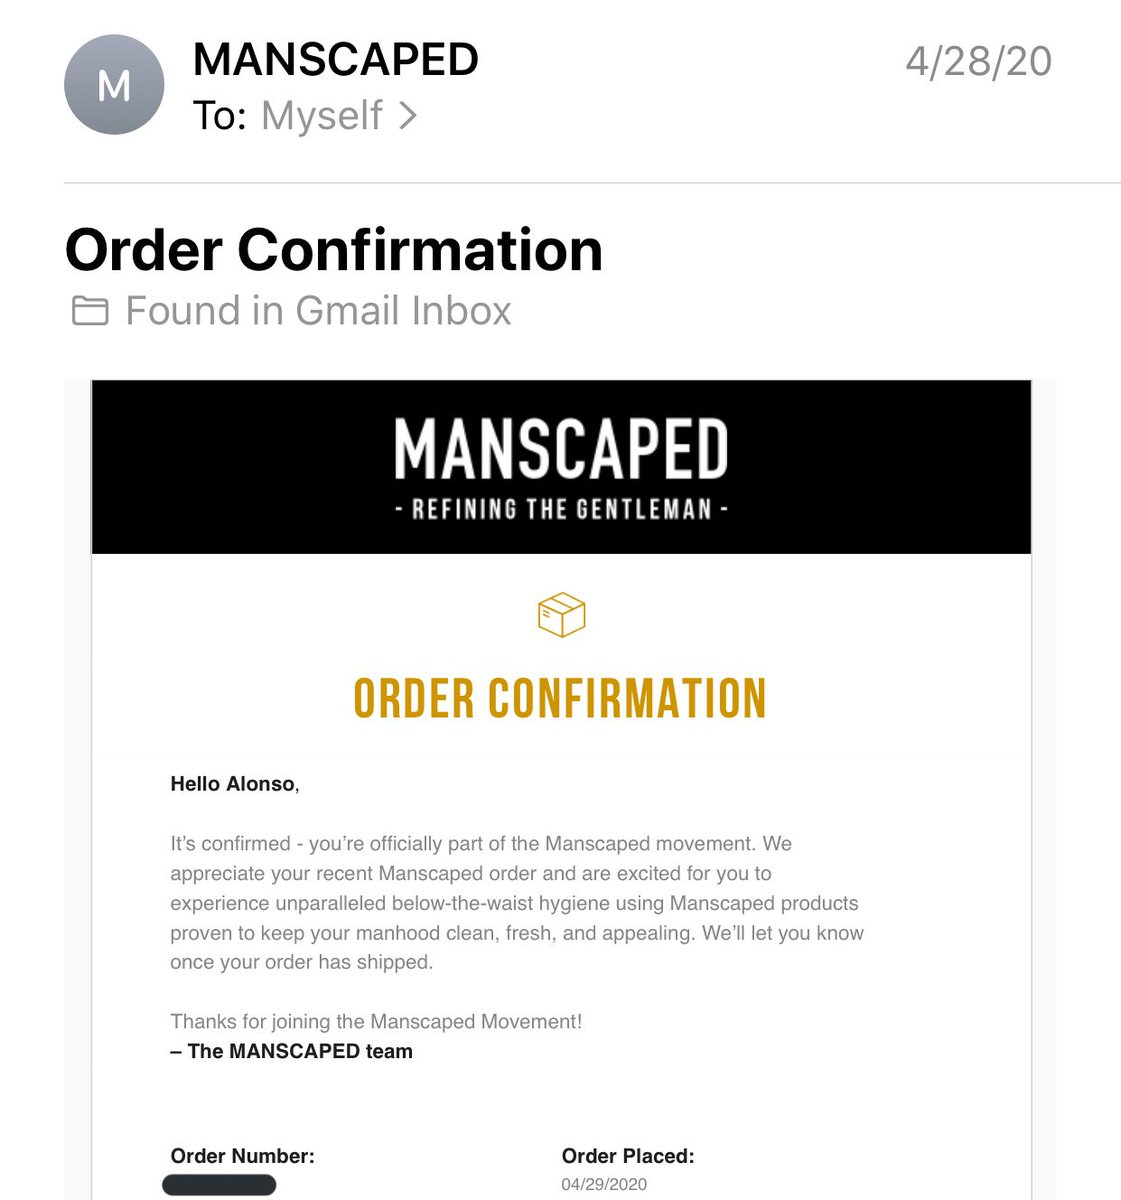 1. Cannot find any estimated shipping times anywhere on the  @manscaped website 2. Cannot find how many days it will take for order to ship 3. Immediately after ordering I got a confirmation email. Which was expected, nothing bad here. Here’s the email